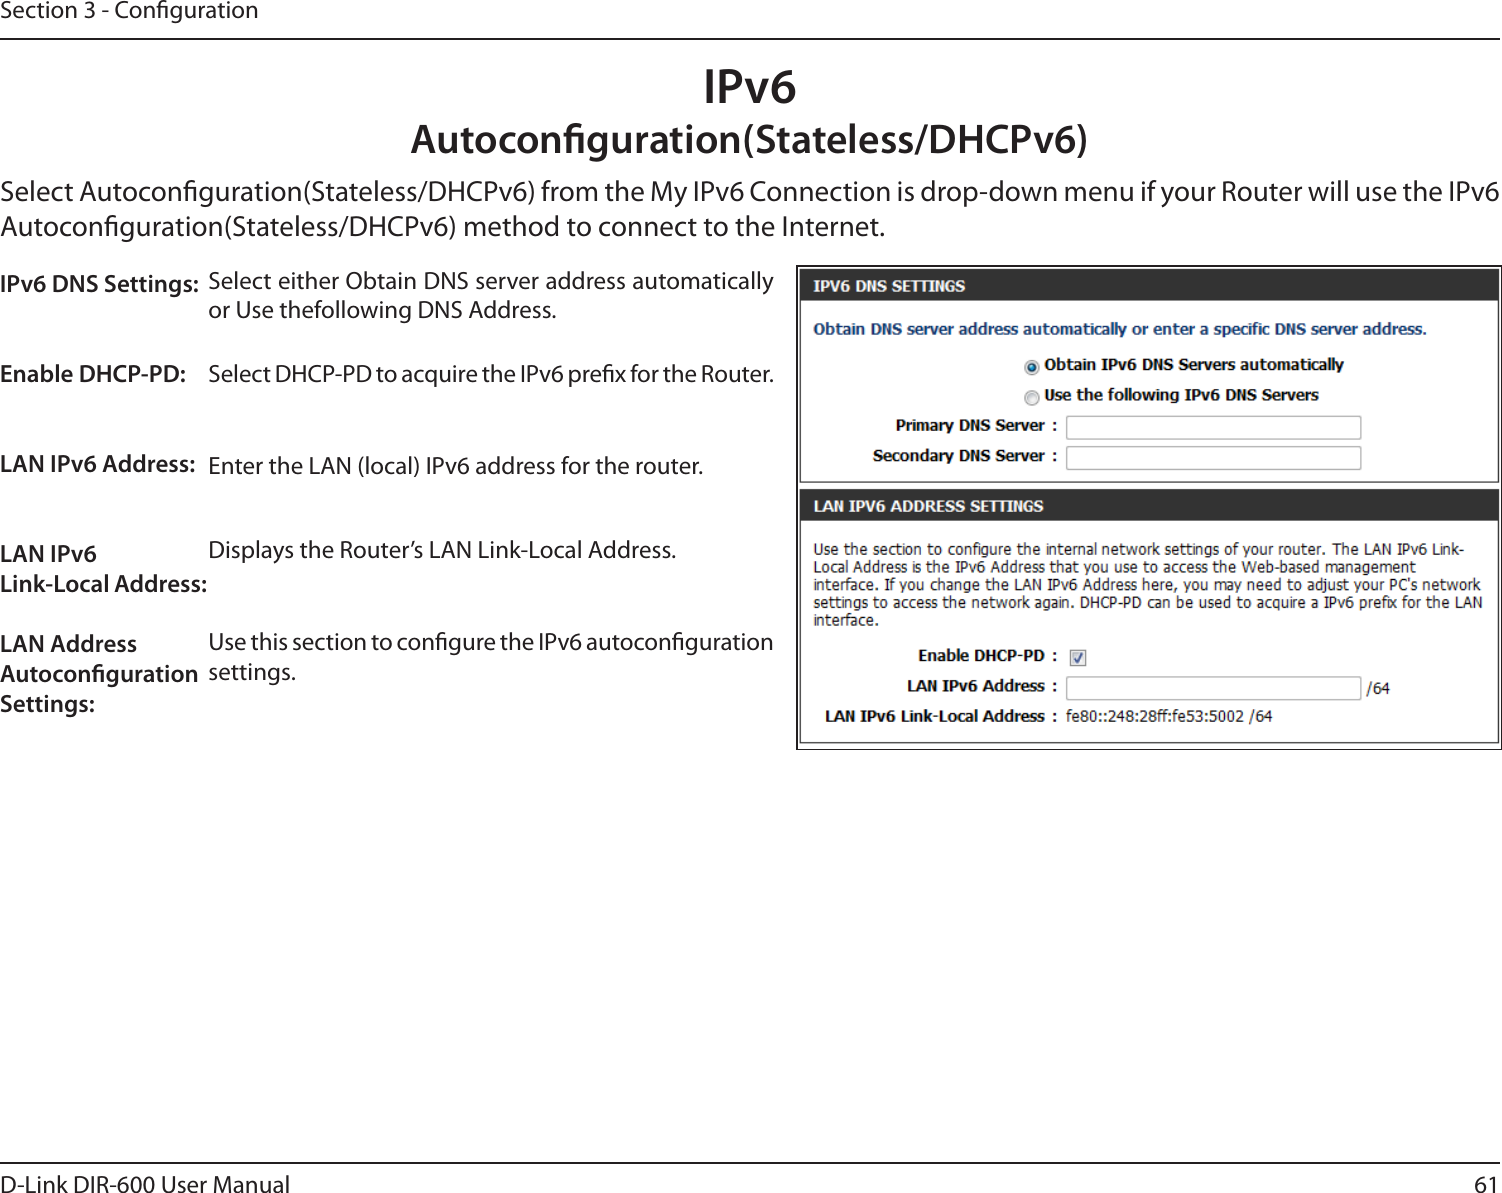 61D-Link DIR-600 User ManualSection 3 - CongurationIPv6Autoconguration(Stateless/DHCPv6)Select Autoconguration(Stateless/DHCPv6) from the My IPv6 Connection is drop-down menu if your Router will use the IPv6 Autoconguration(Stateless/DHCPv6) method to connect to the Internet.Select either Obtain DNS server address automatically or Use thefollowing DNS Address.Select DHCP-PD to acquire the IPv6 prex for the Router.Enter the LAN (local) IPv6 address for the router.Displays the Router’s LAN Link-Local Address.Use this section to congure the IPv6 autoconguration settings.IPv6 DNS Settings:Enable DHCP-PD: LAN IPv6 Address: LAN IPv6 Link-Local Address: LAN Address Autoconguration Settings: